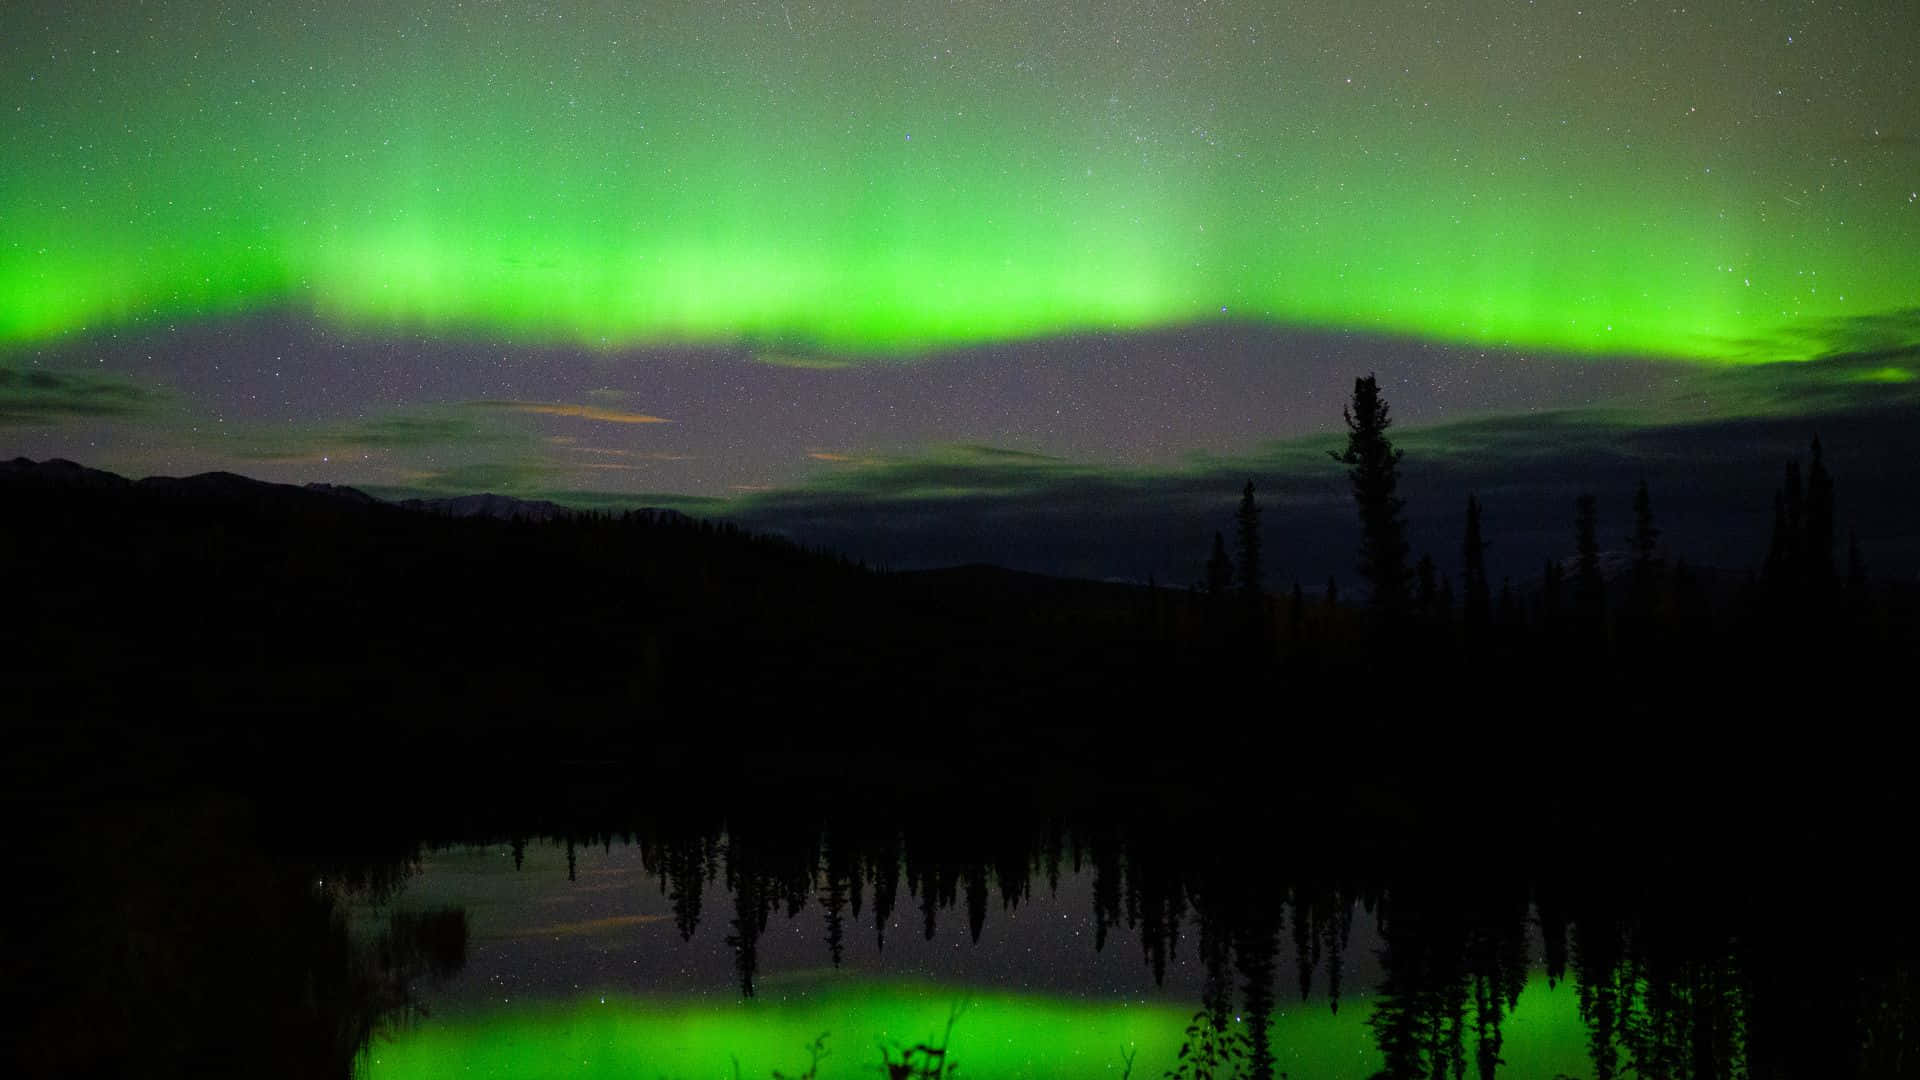 An Exhilarating Night View of the Stunning Northern Lights